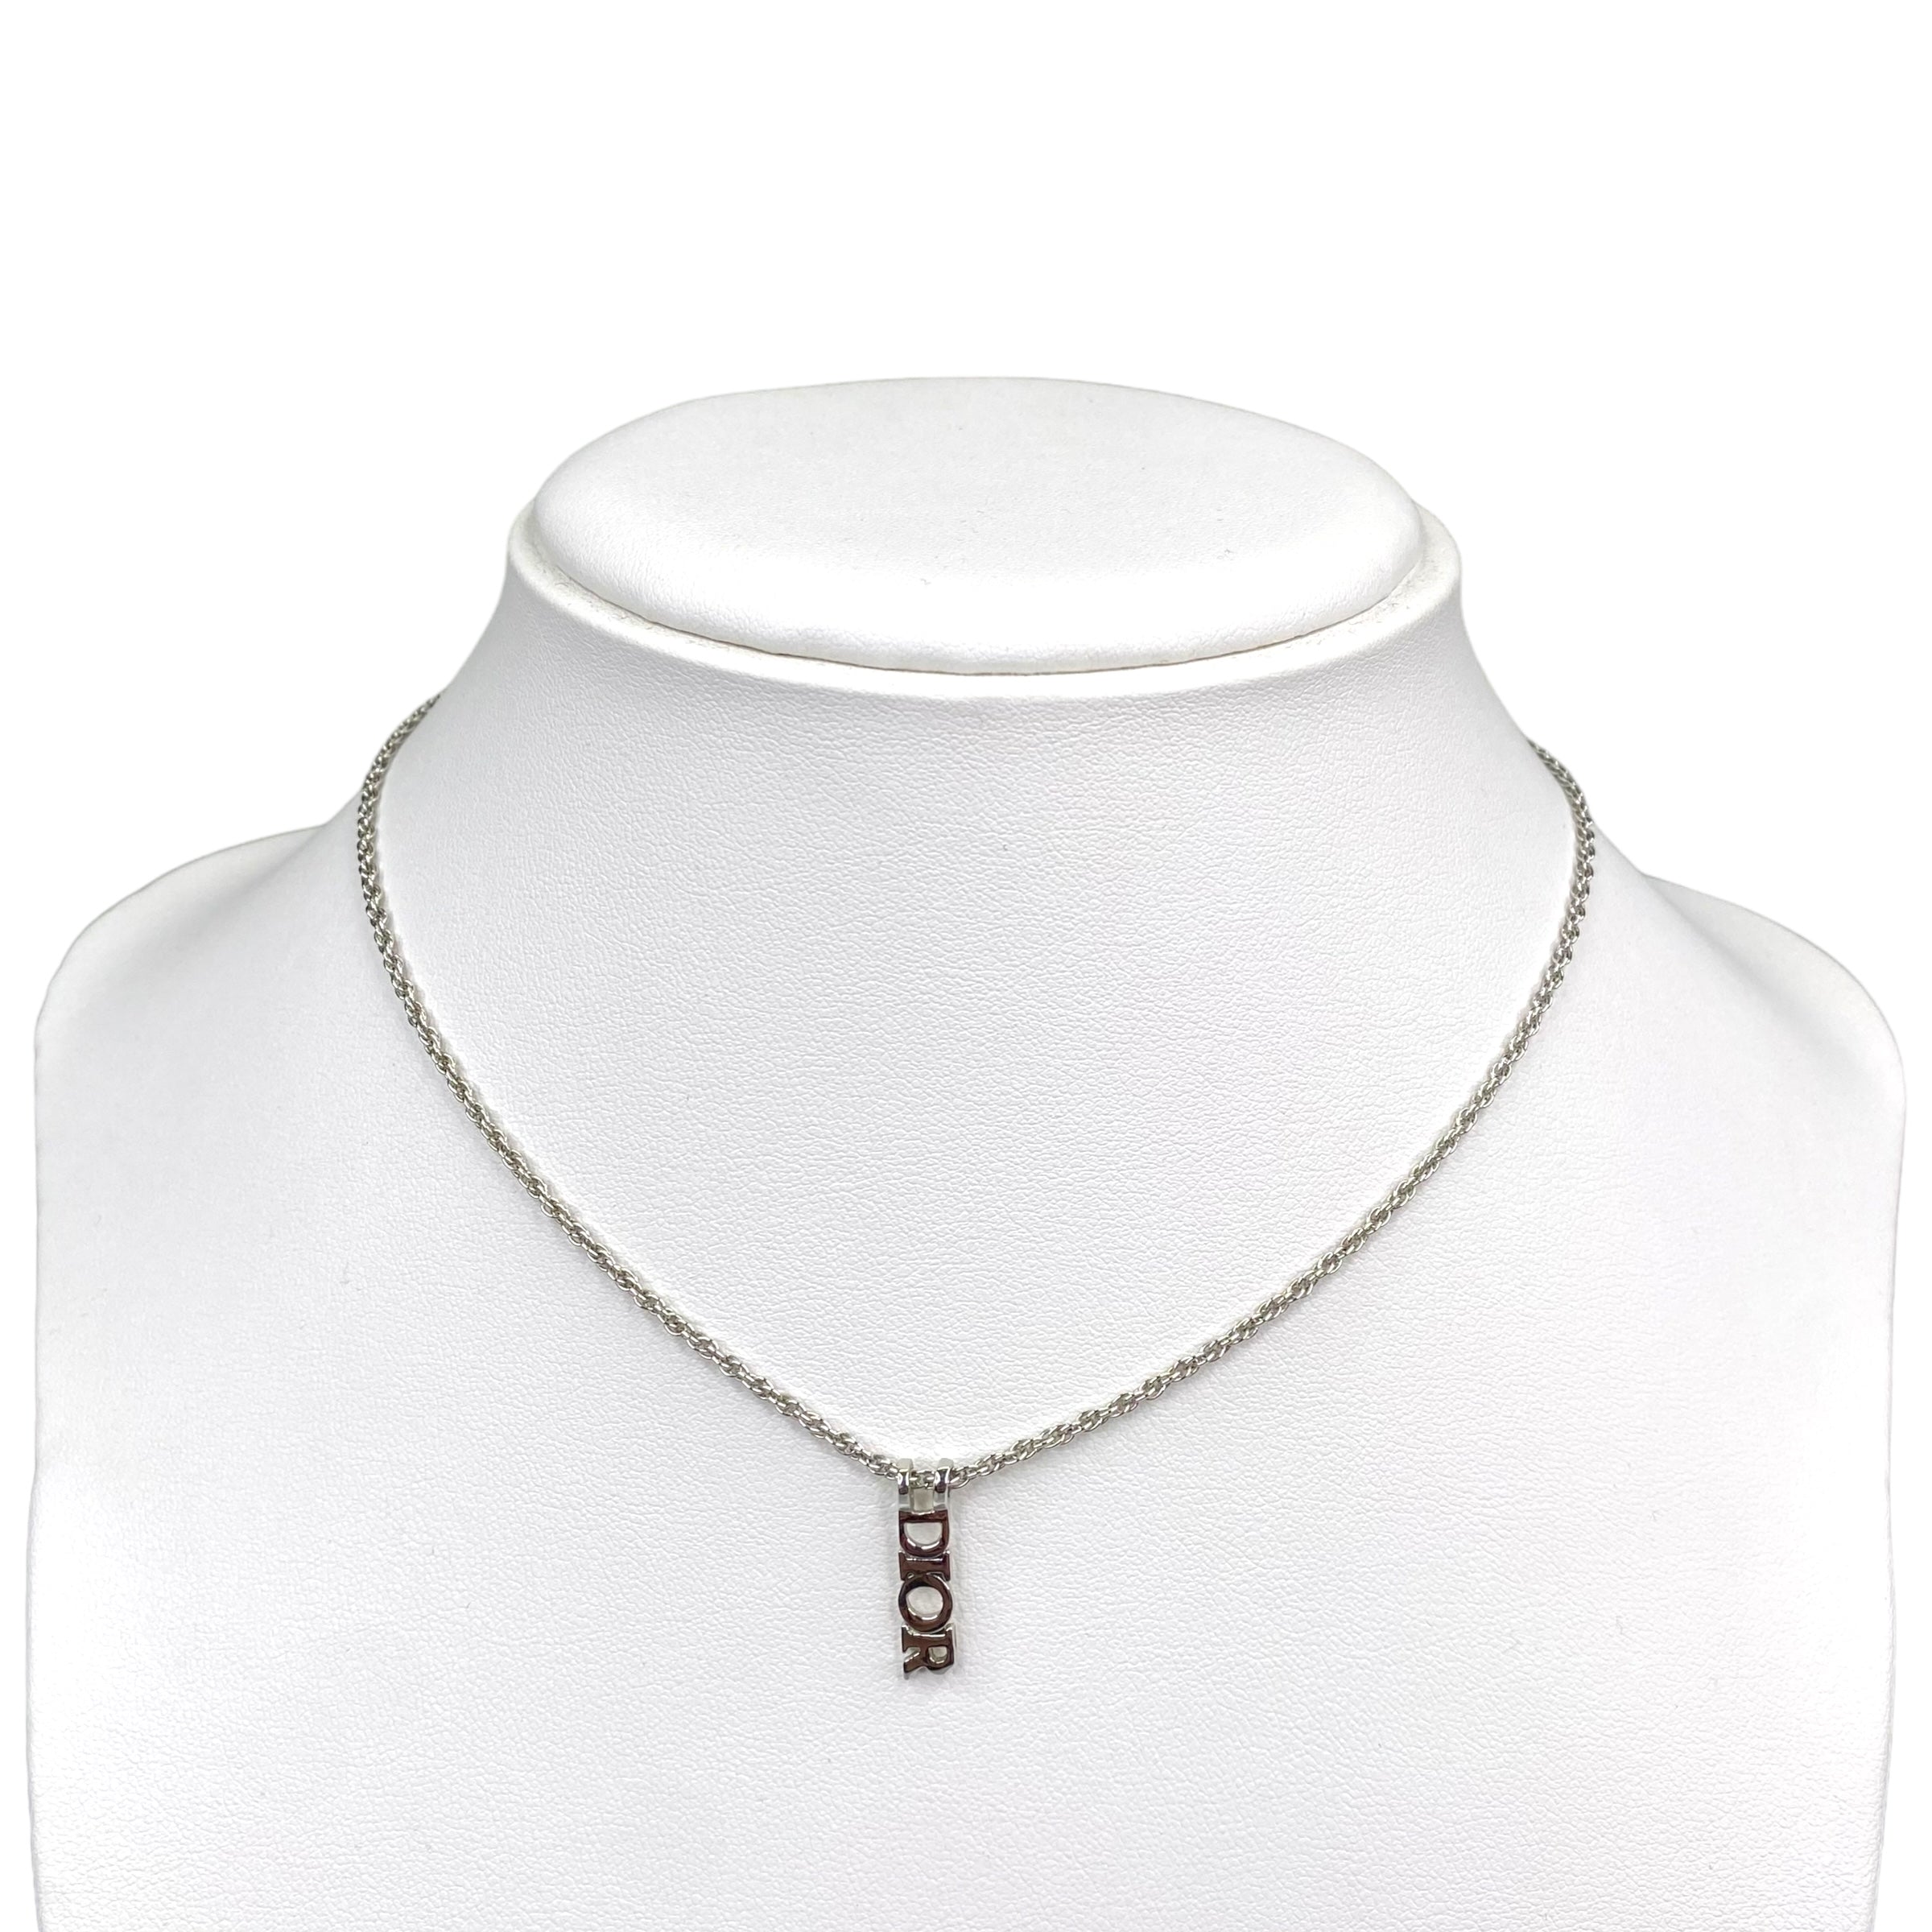 DIOR CAPITAL SPELLOUT PENDANT SILVER PLATED NECKLACE